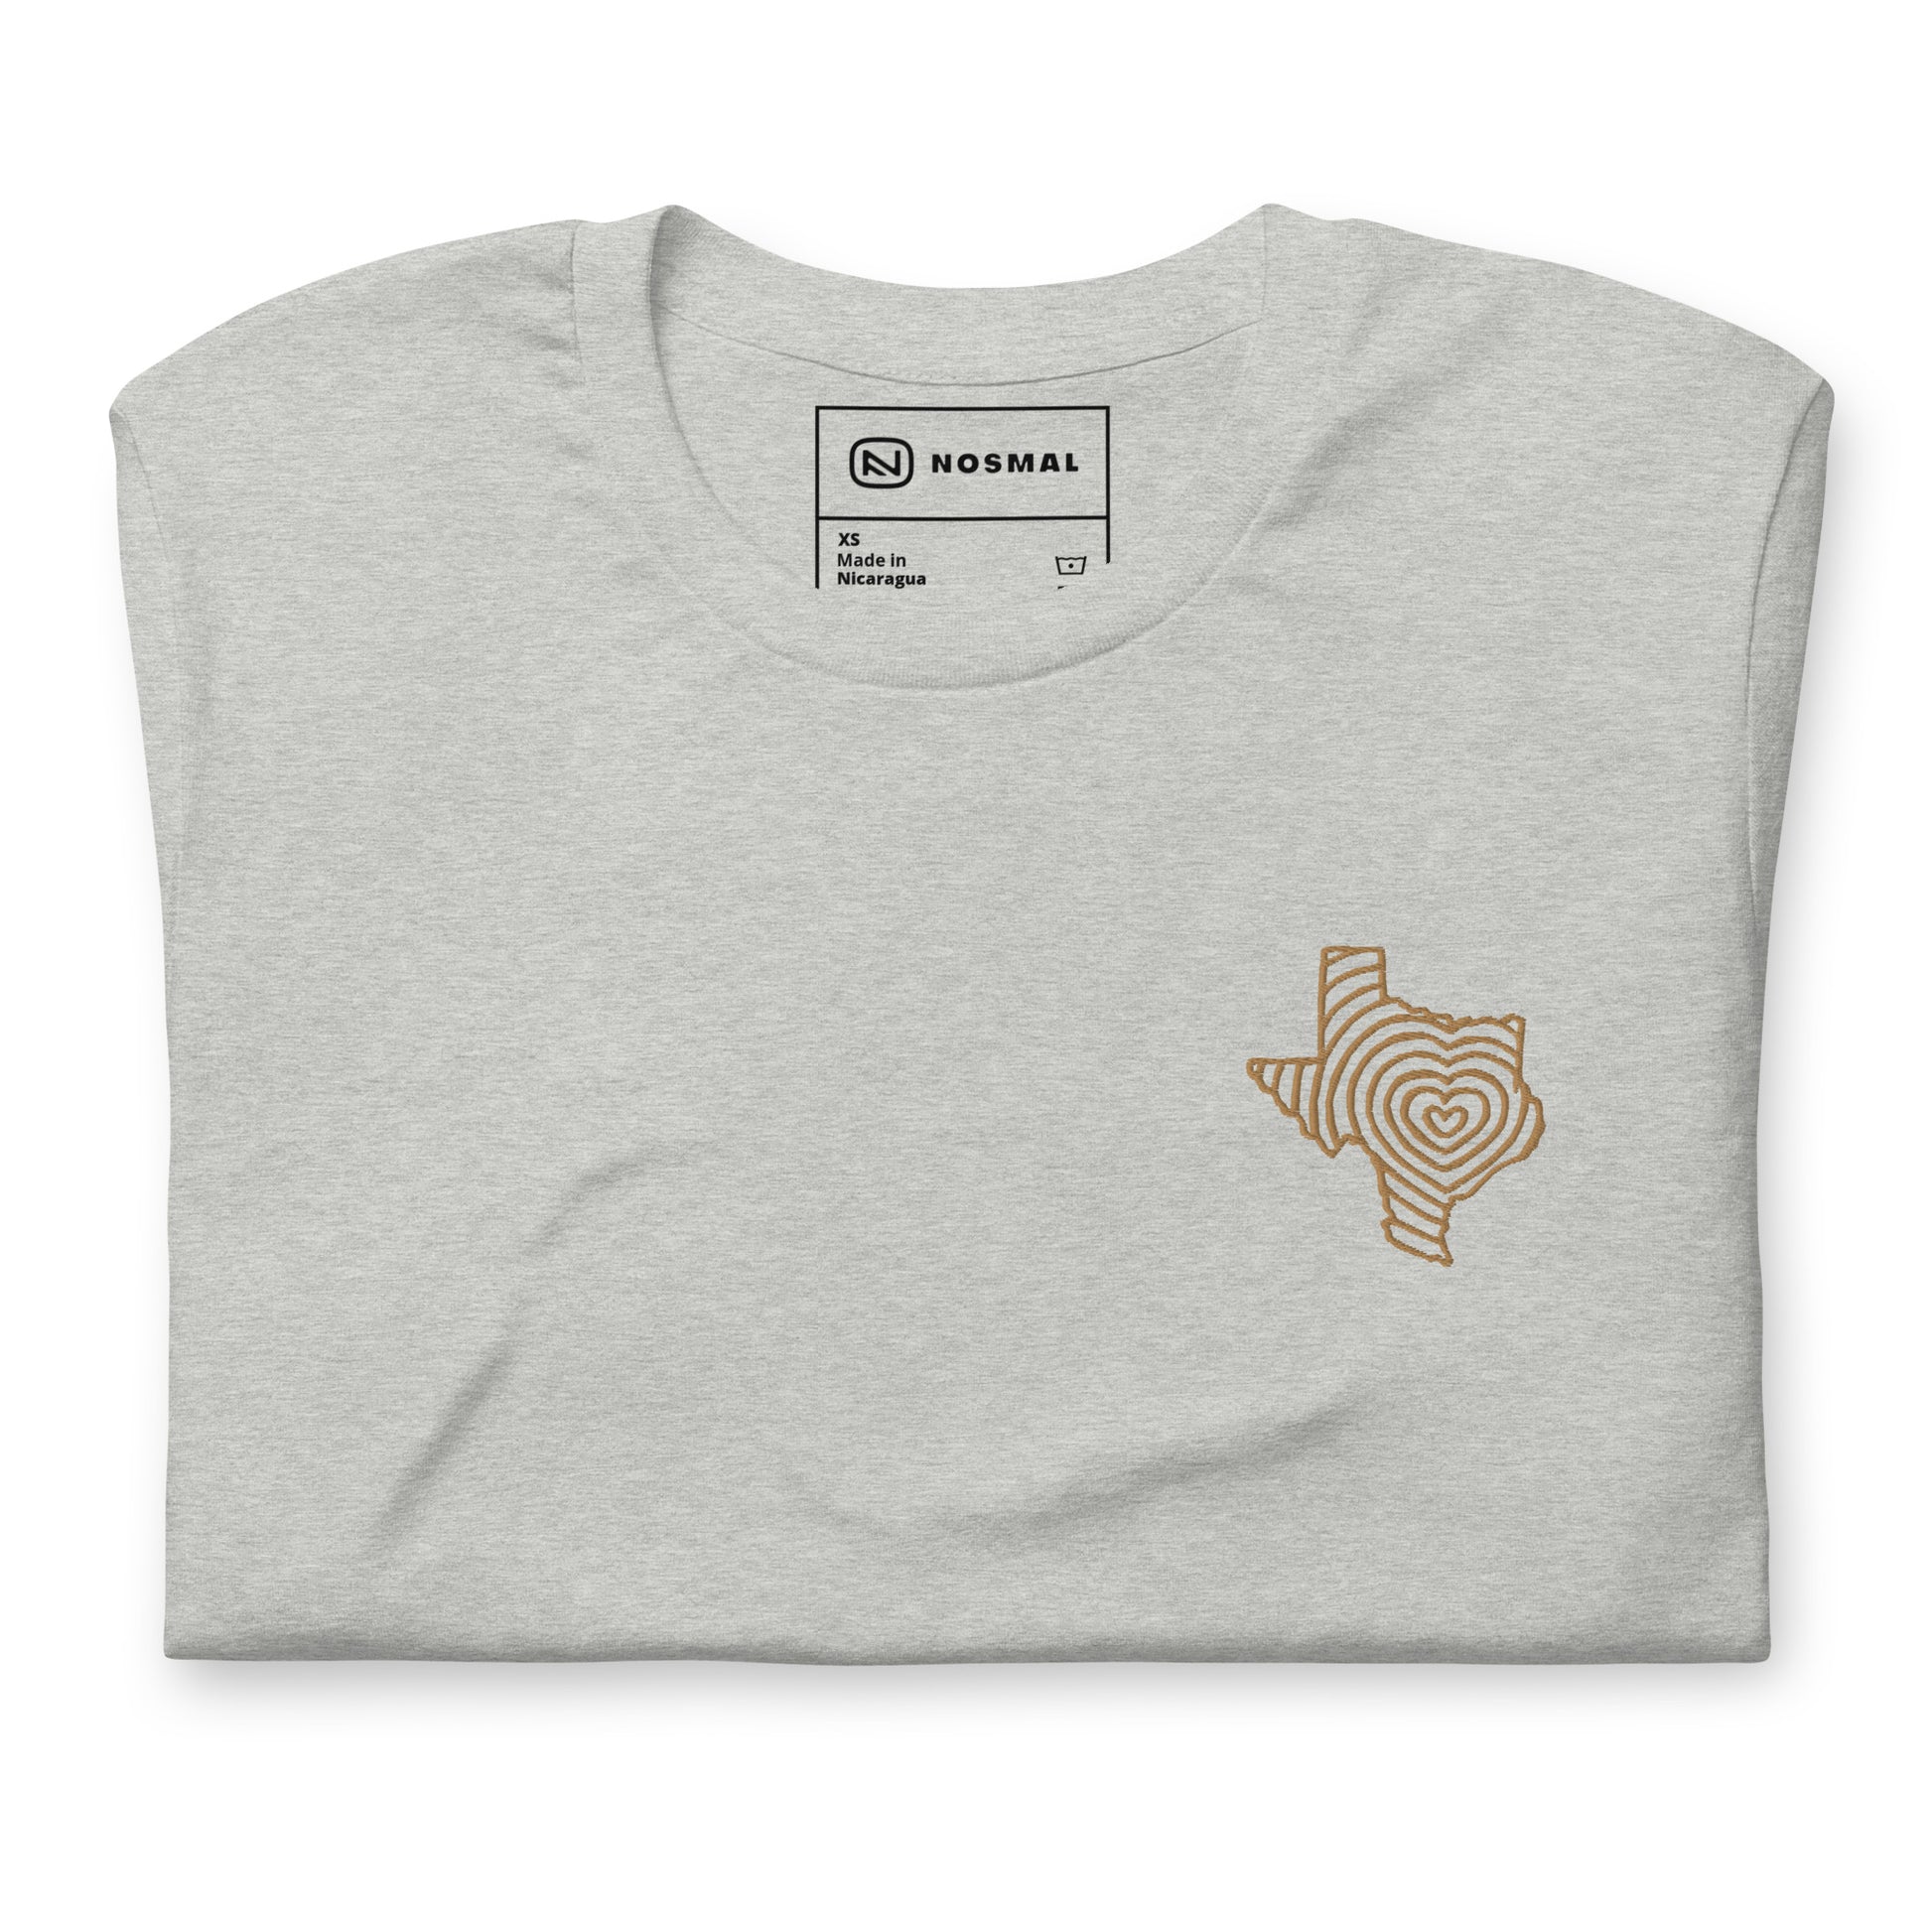 Top down view of heartbeat of texas gold embroidered design on heather athletic grey unisex t-shirt.